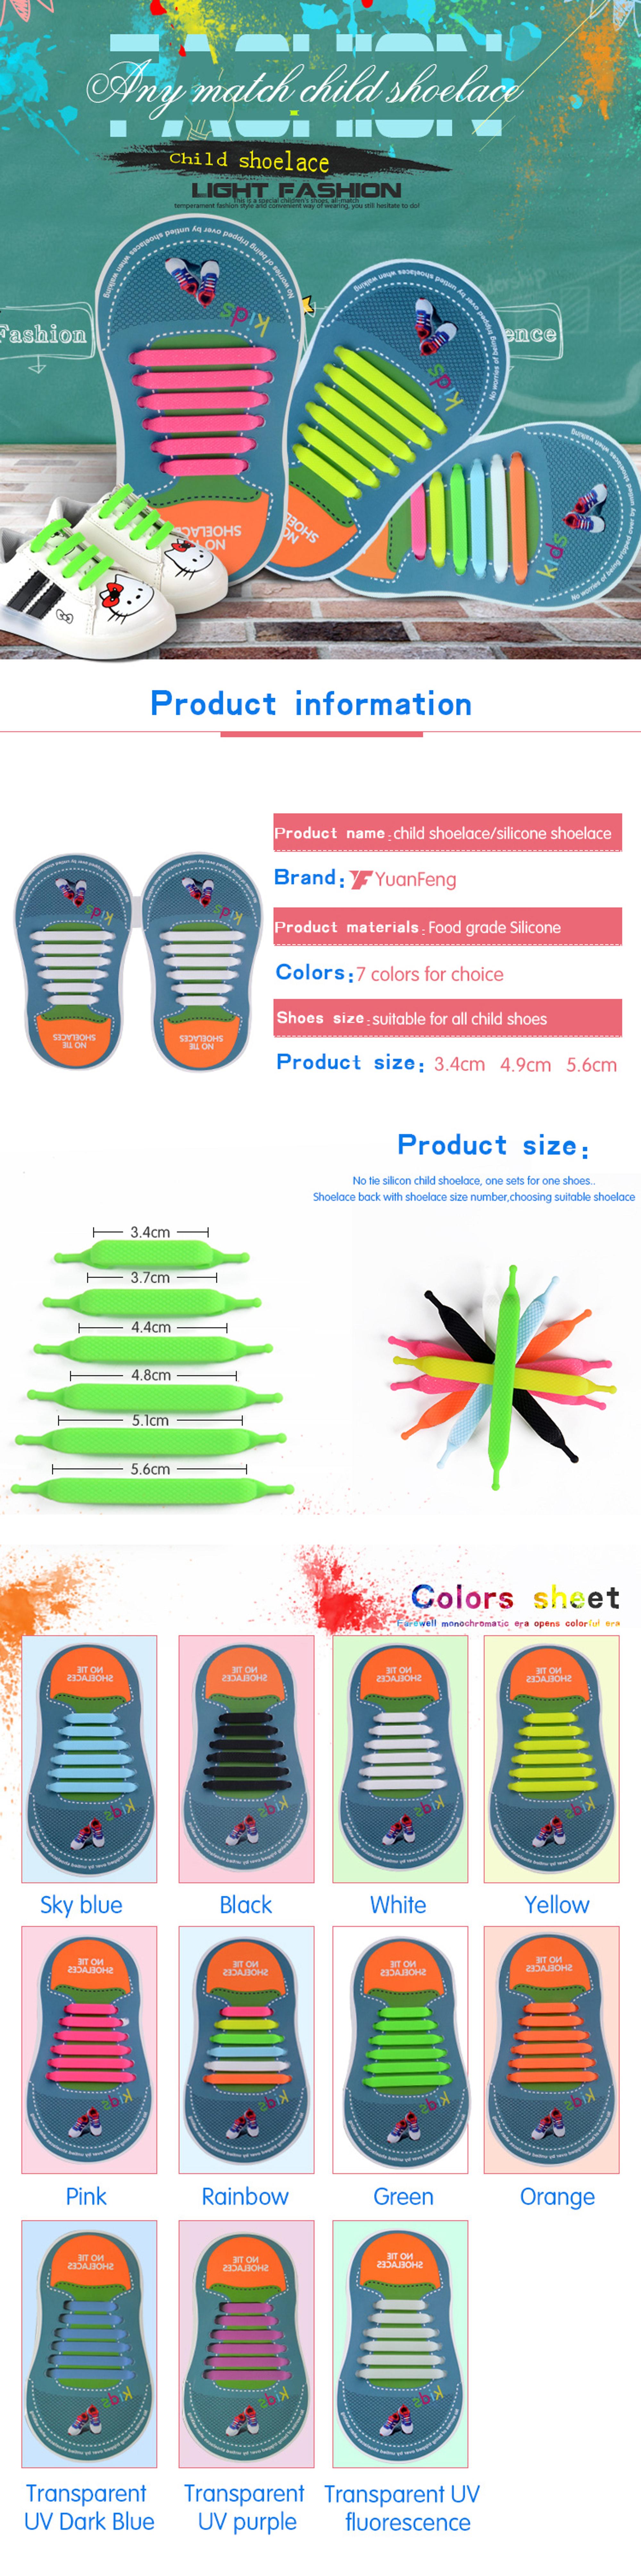 Elastic No Tie Silicone Shoelaces for Kids and Adults for Running and Walking Shoes 5